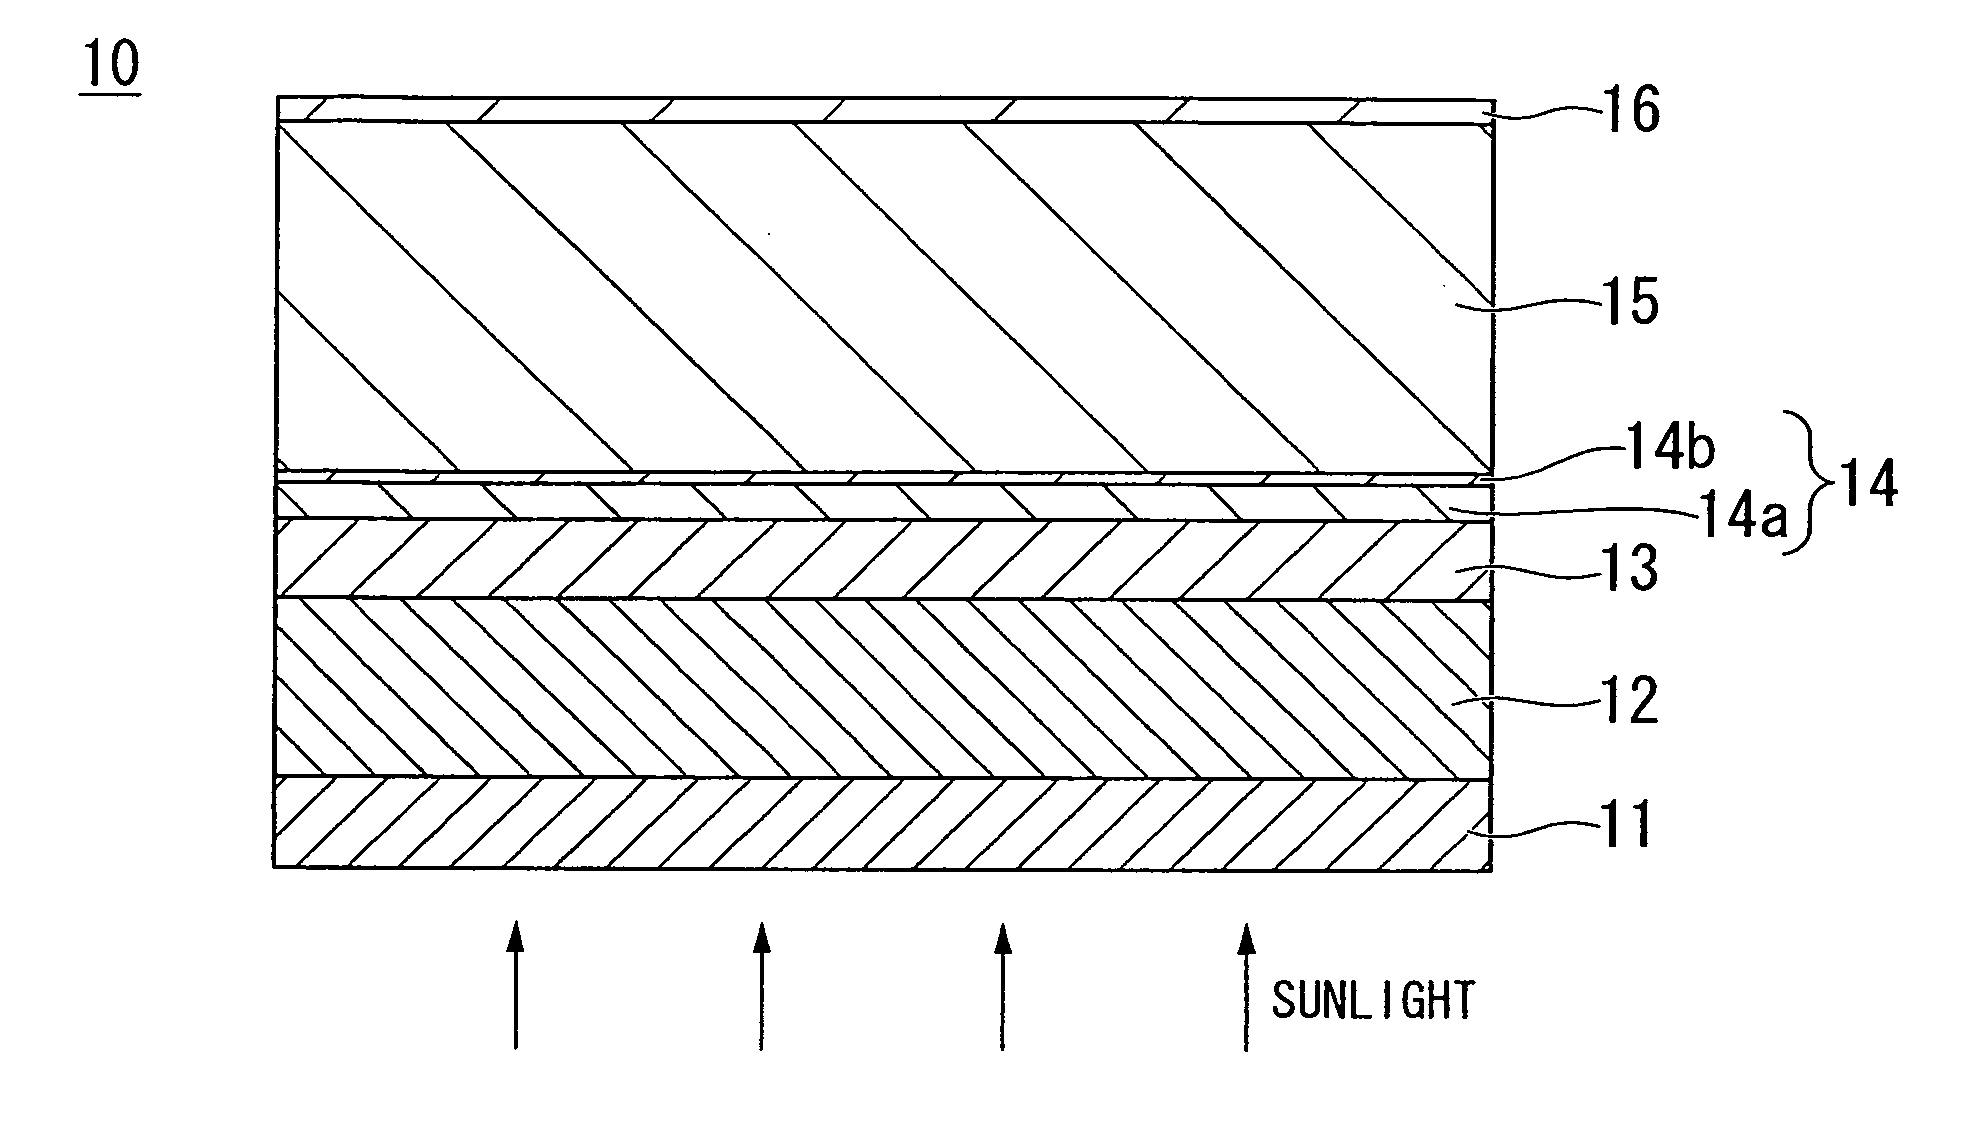 Transparent electroconductive film for solar cell, composition for transparent electroconductive film and multi-junction solar cell